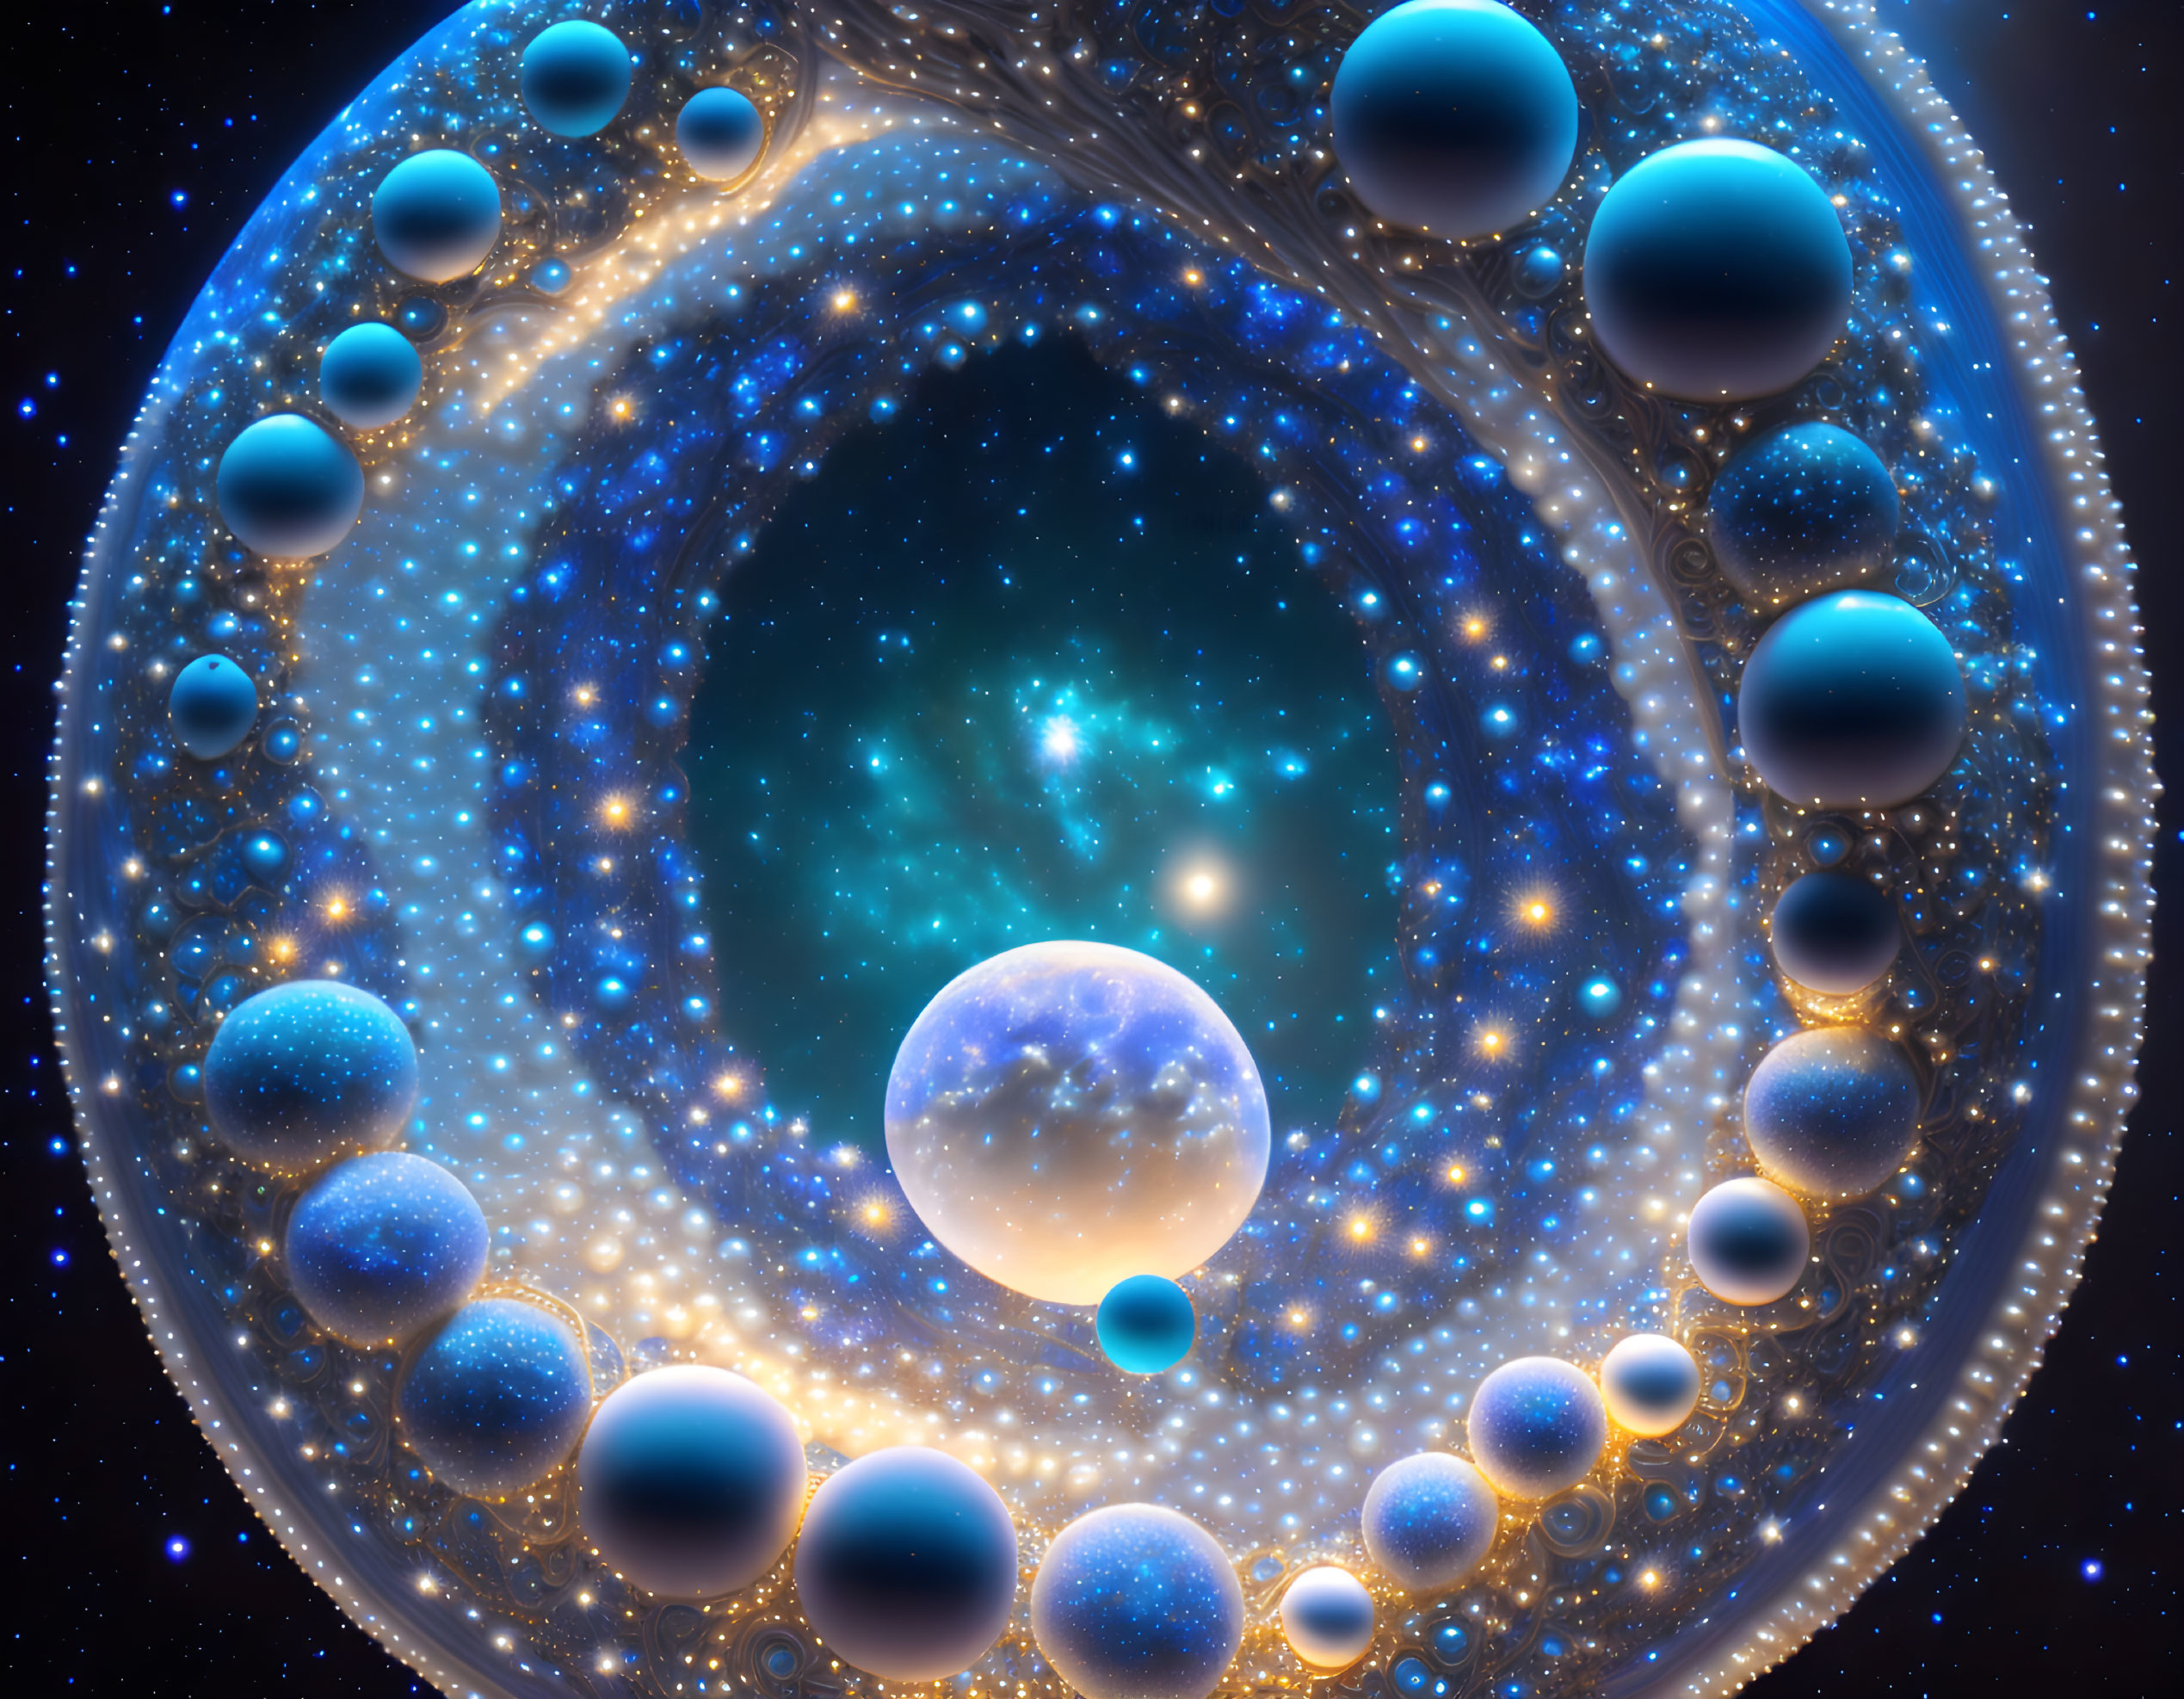 Fractal Spiral Pattern of Spherical Objects in Cosmic Setting